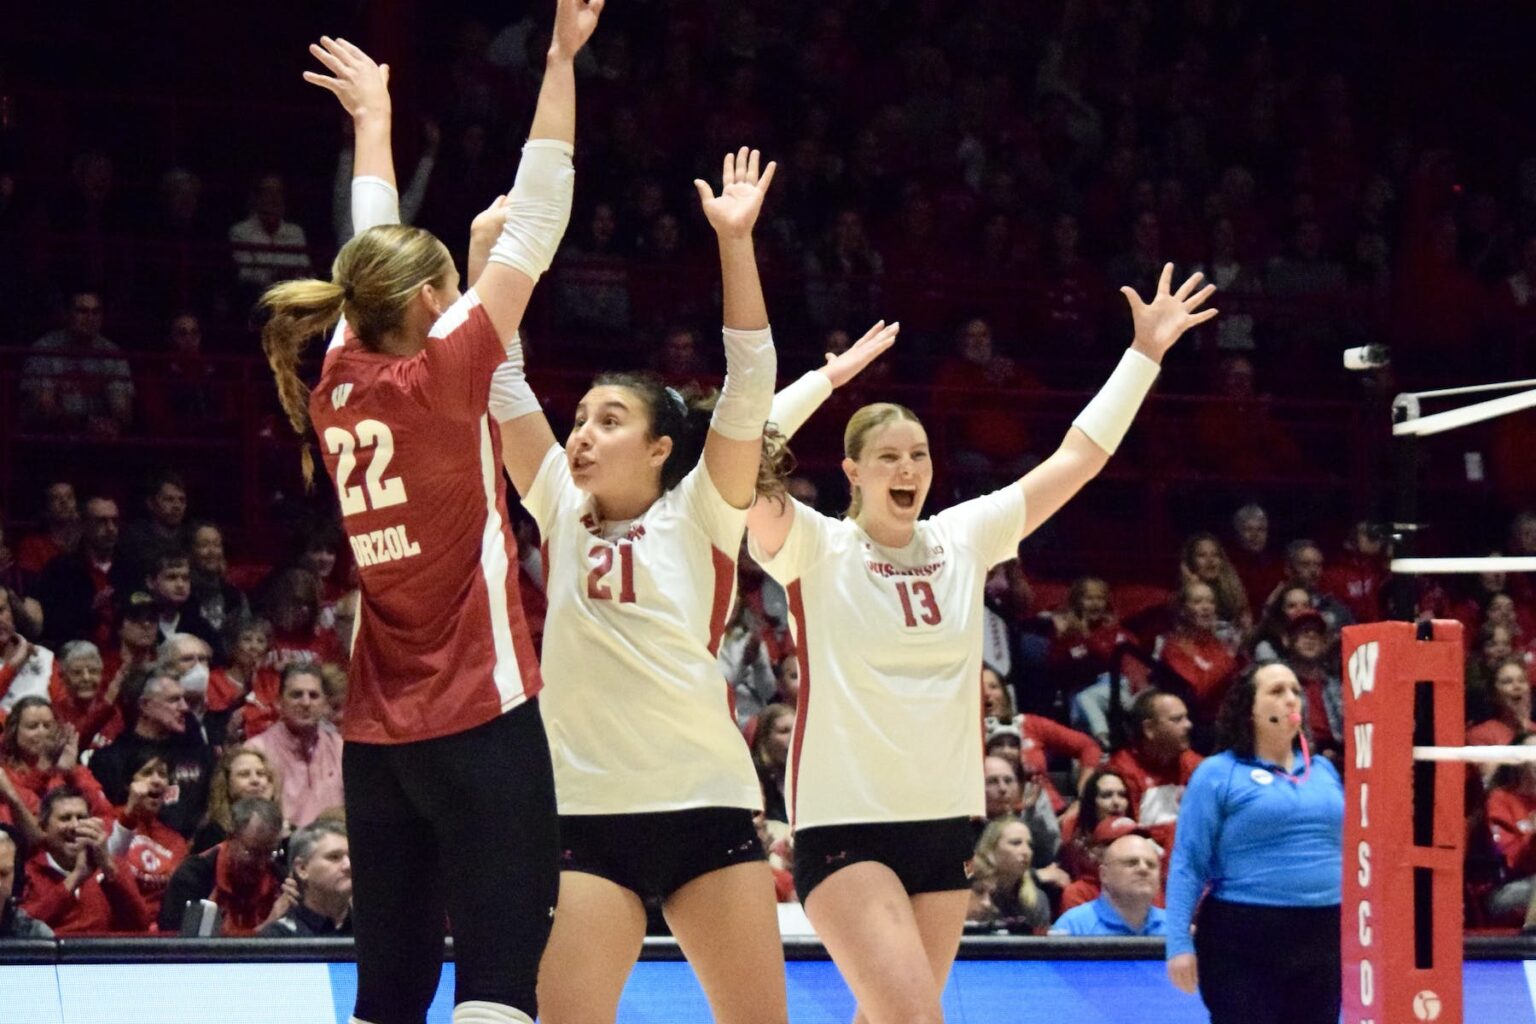 Badgers volleyball got back to their winning ways.